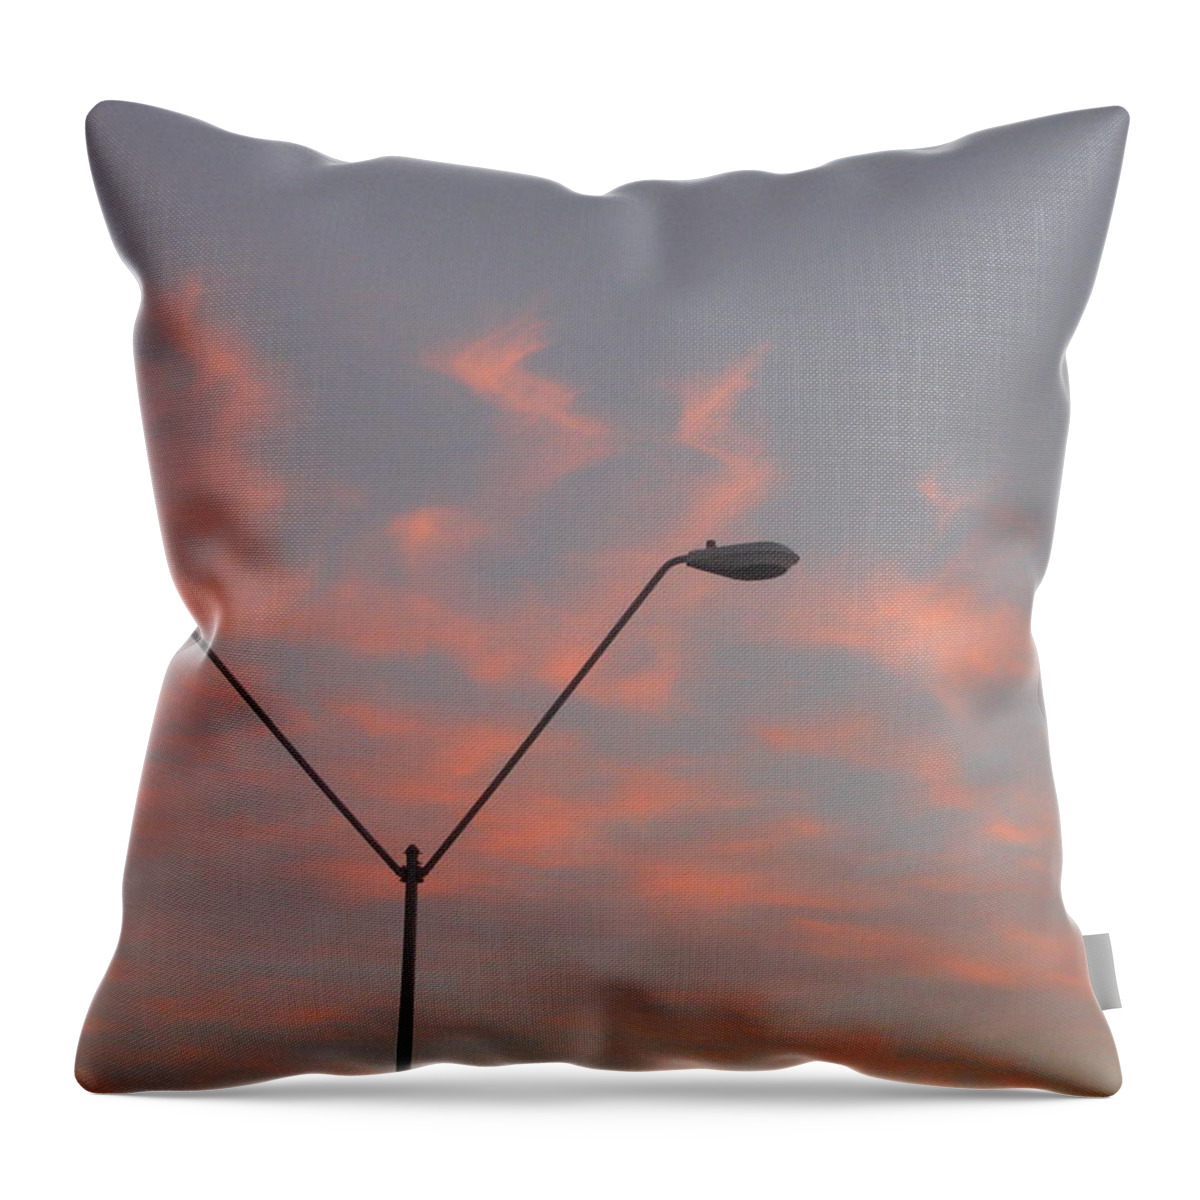 Film Homage George Pal The War Of The Worlds 1953 Parking Lot Lights Casa Grande Arizona 2004 Throw Pillow featuring the photograph Film Homage George Pal The War Of The Worlds 1953 Parking Lot Lights Casa Grande Arizona 2004 #2 by David Lee Guss